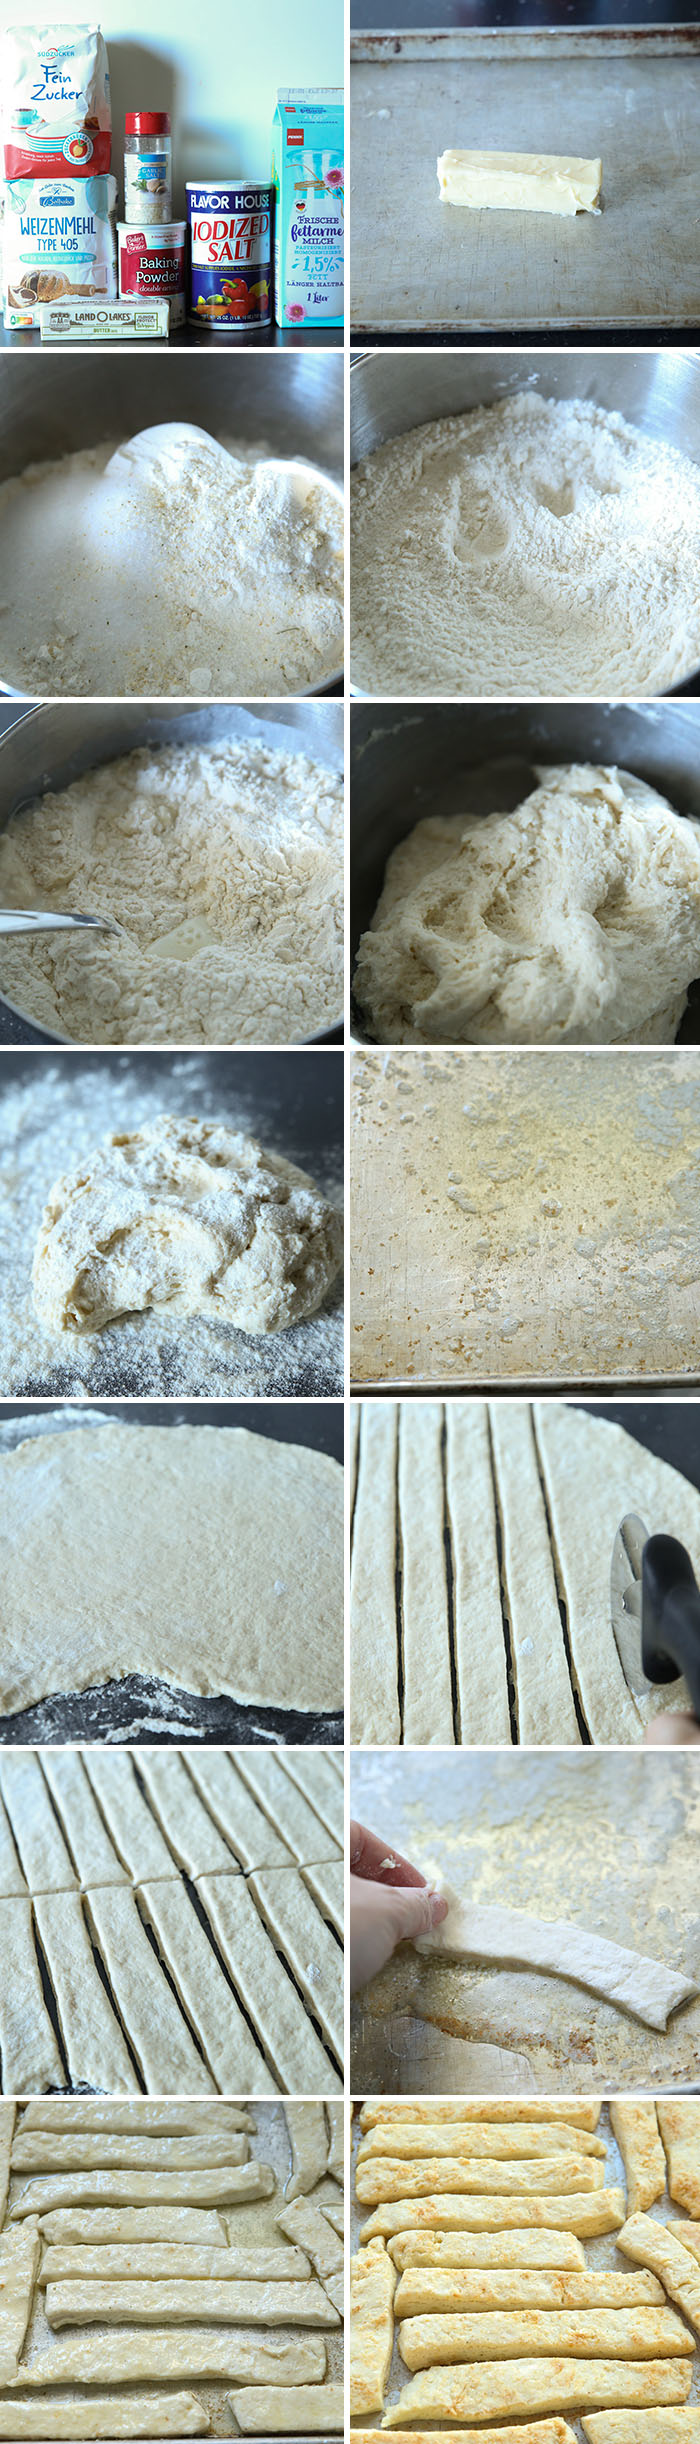 step by step picture collage for how to make easy baking powder breadsticks. There are 14 pictures.